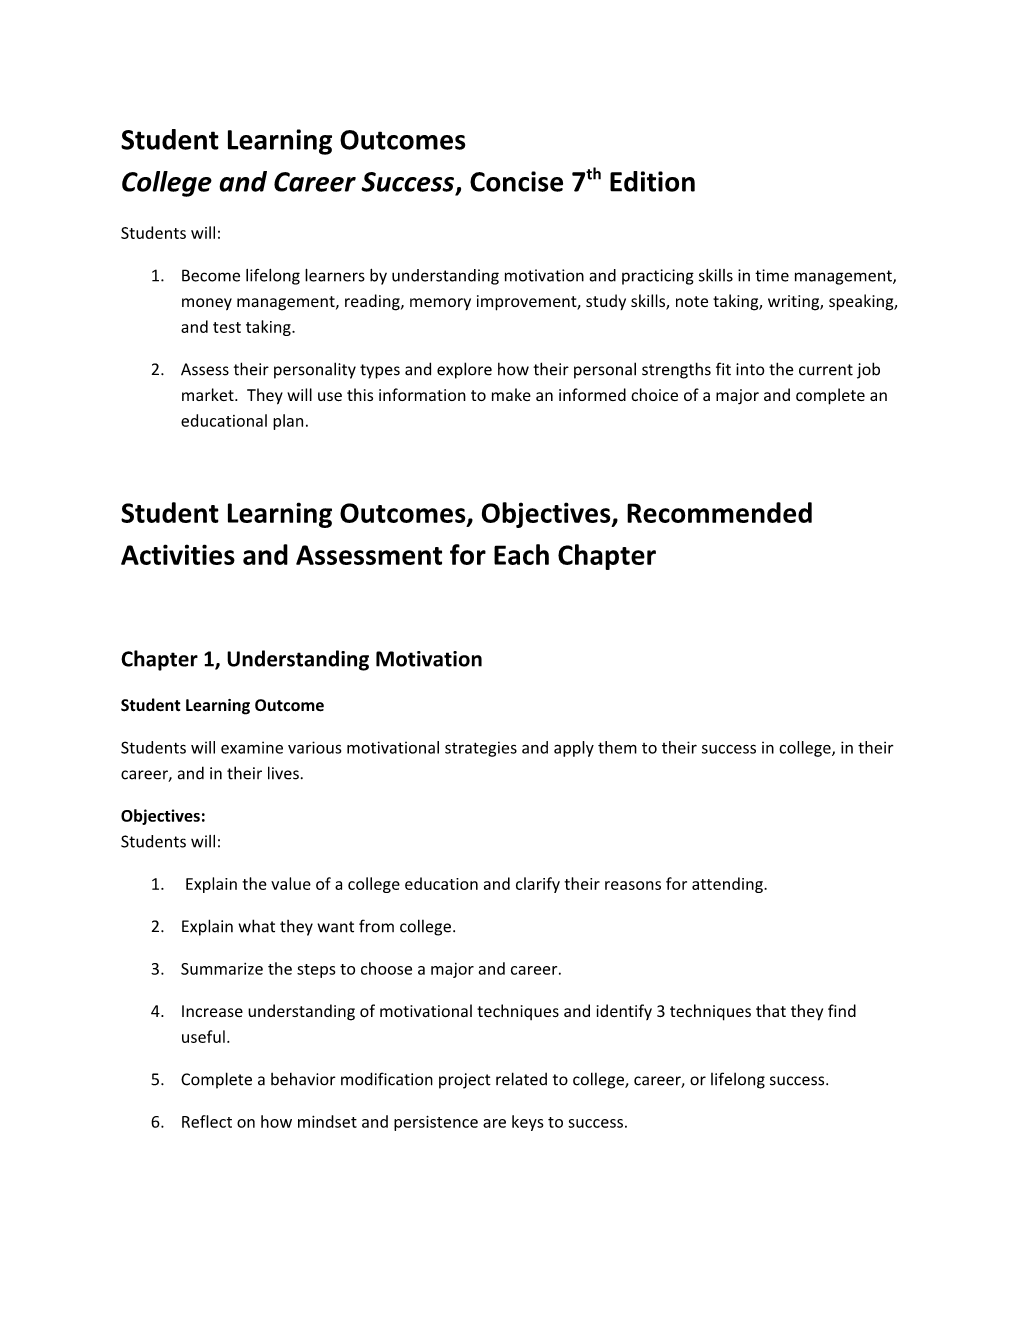 Student Learning Outcomes College and Career Success, Concise 7Th Edition